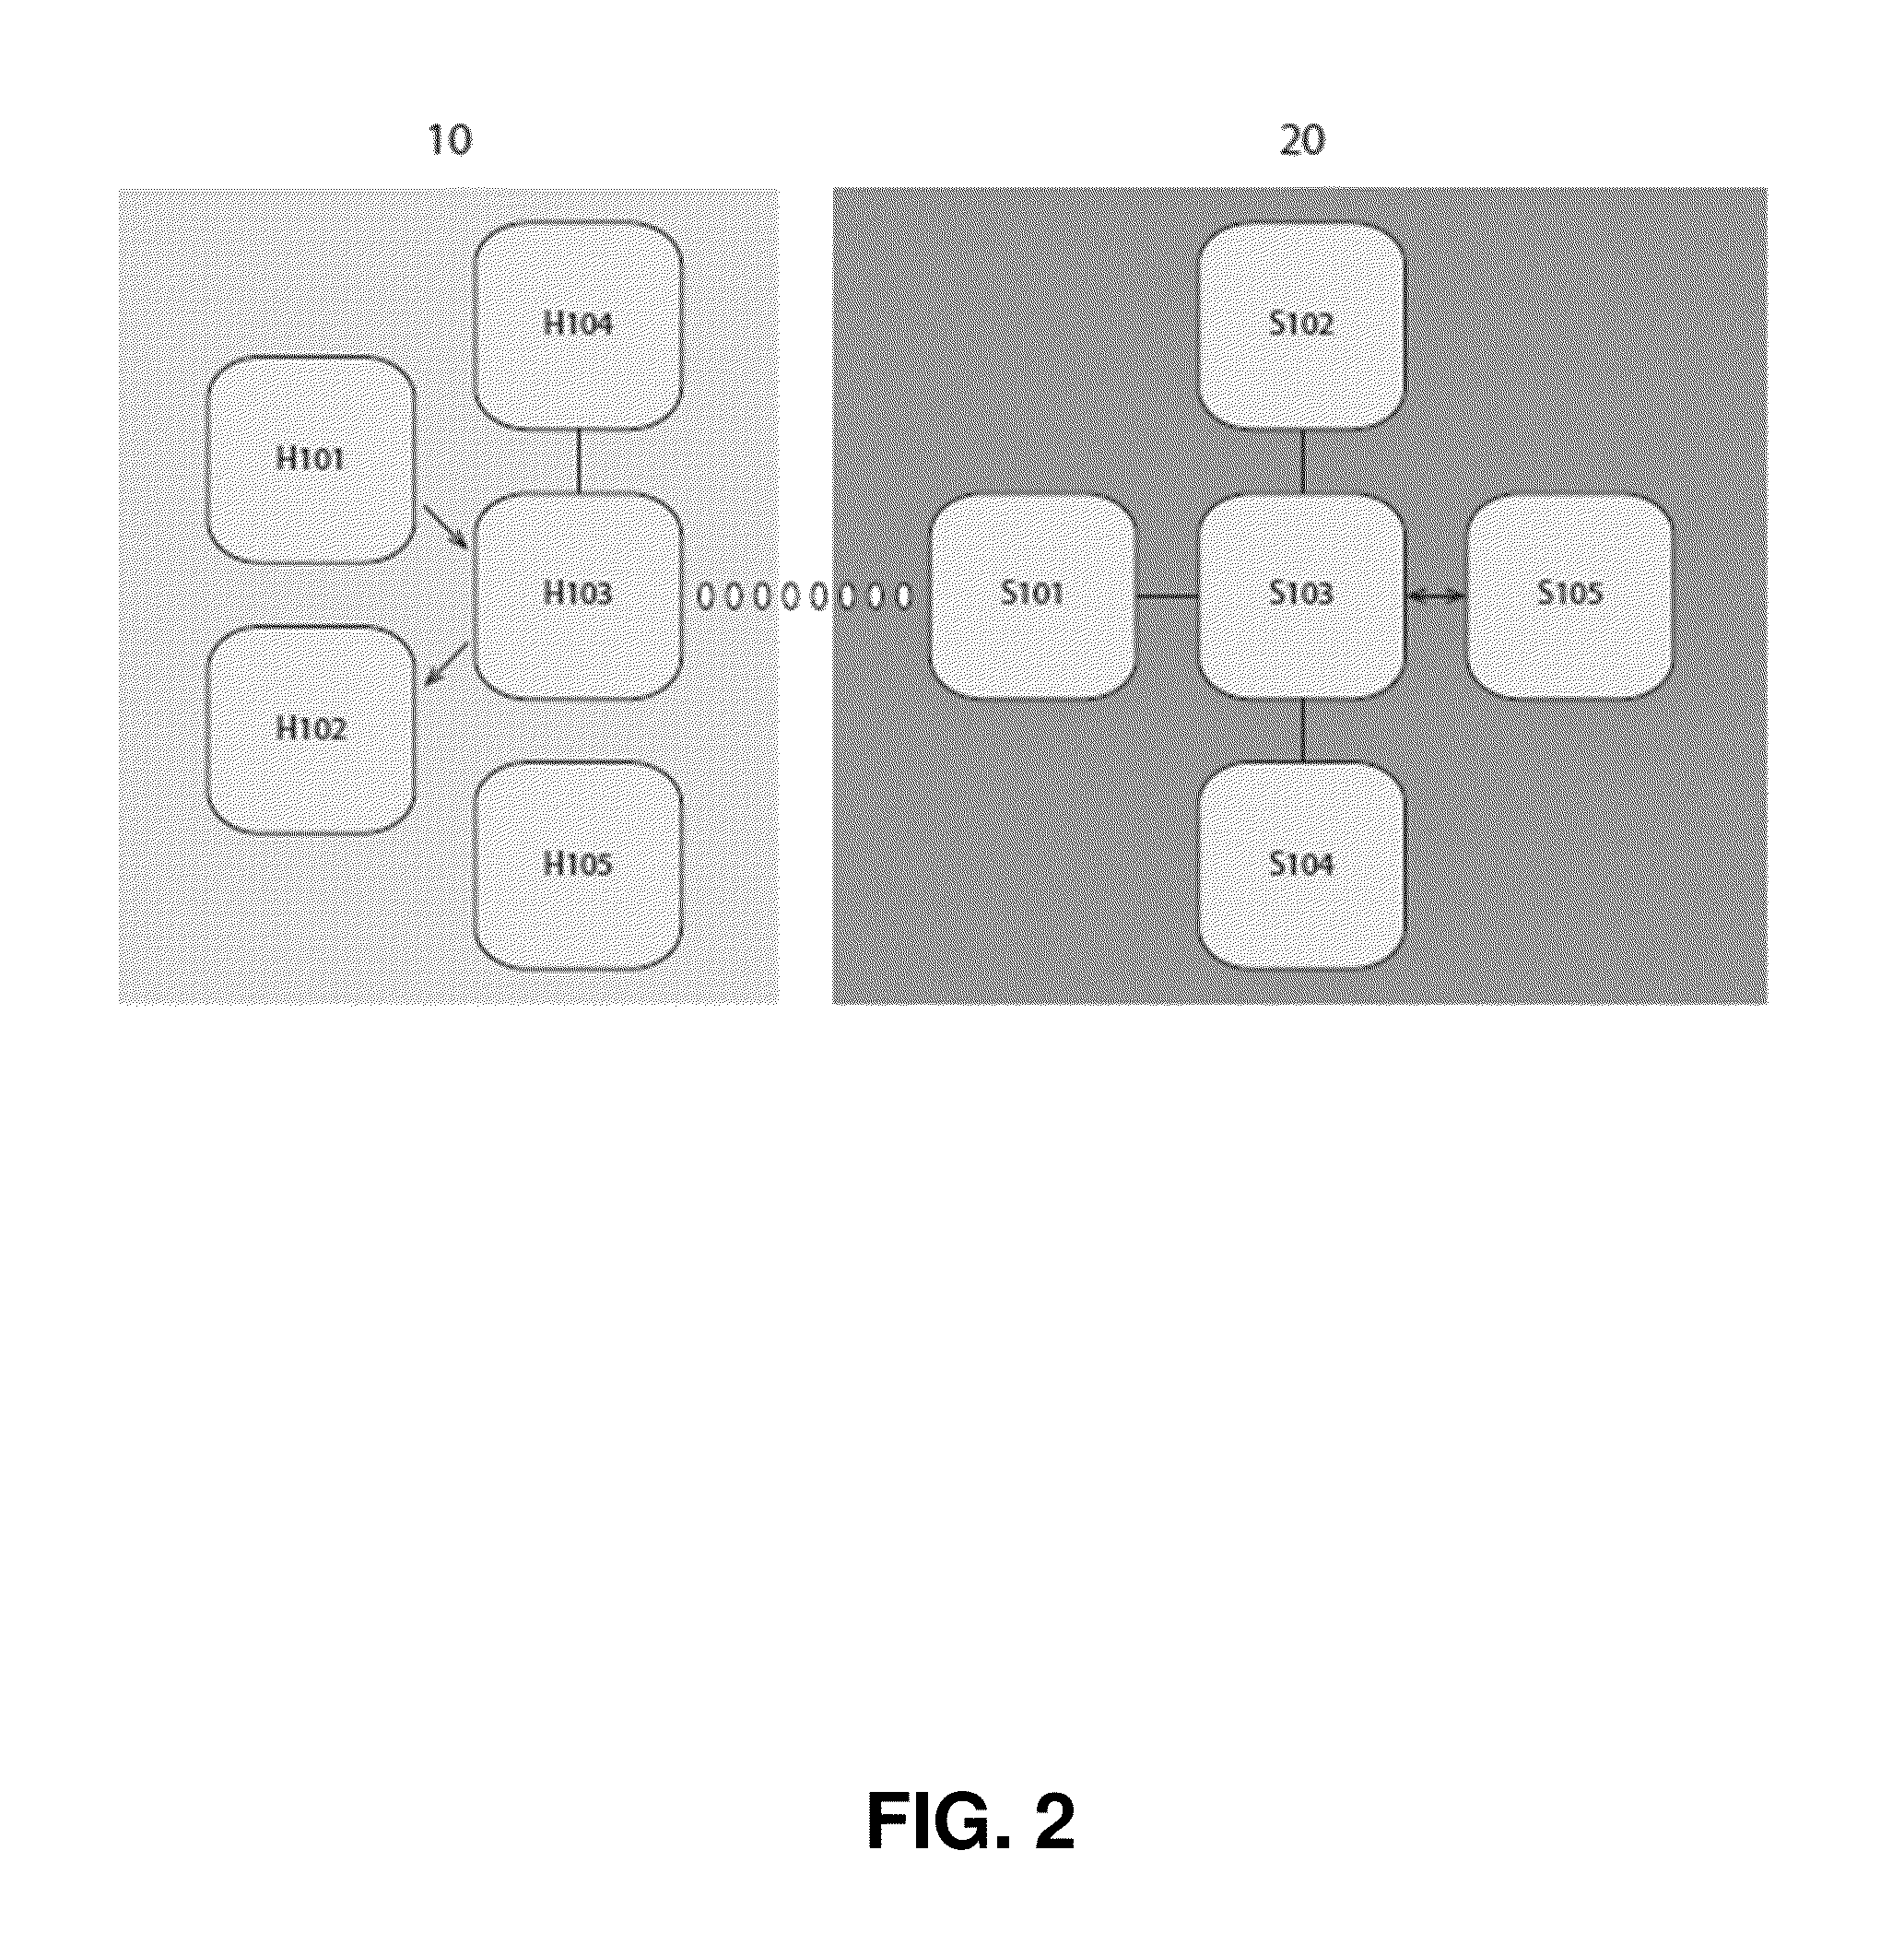 Device and method for sensing, guiding, and/or tracking pelvic exercise